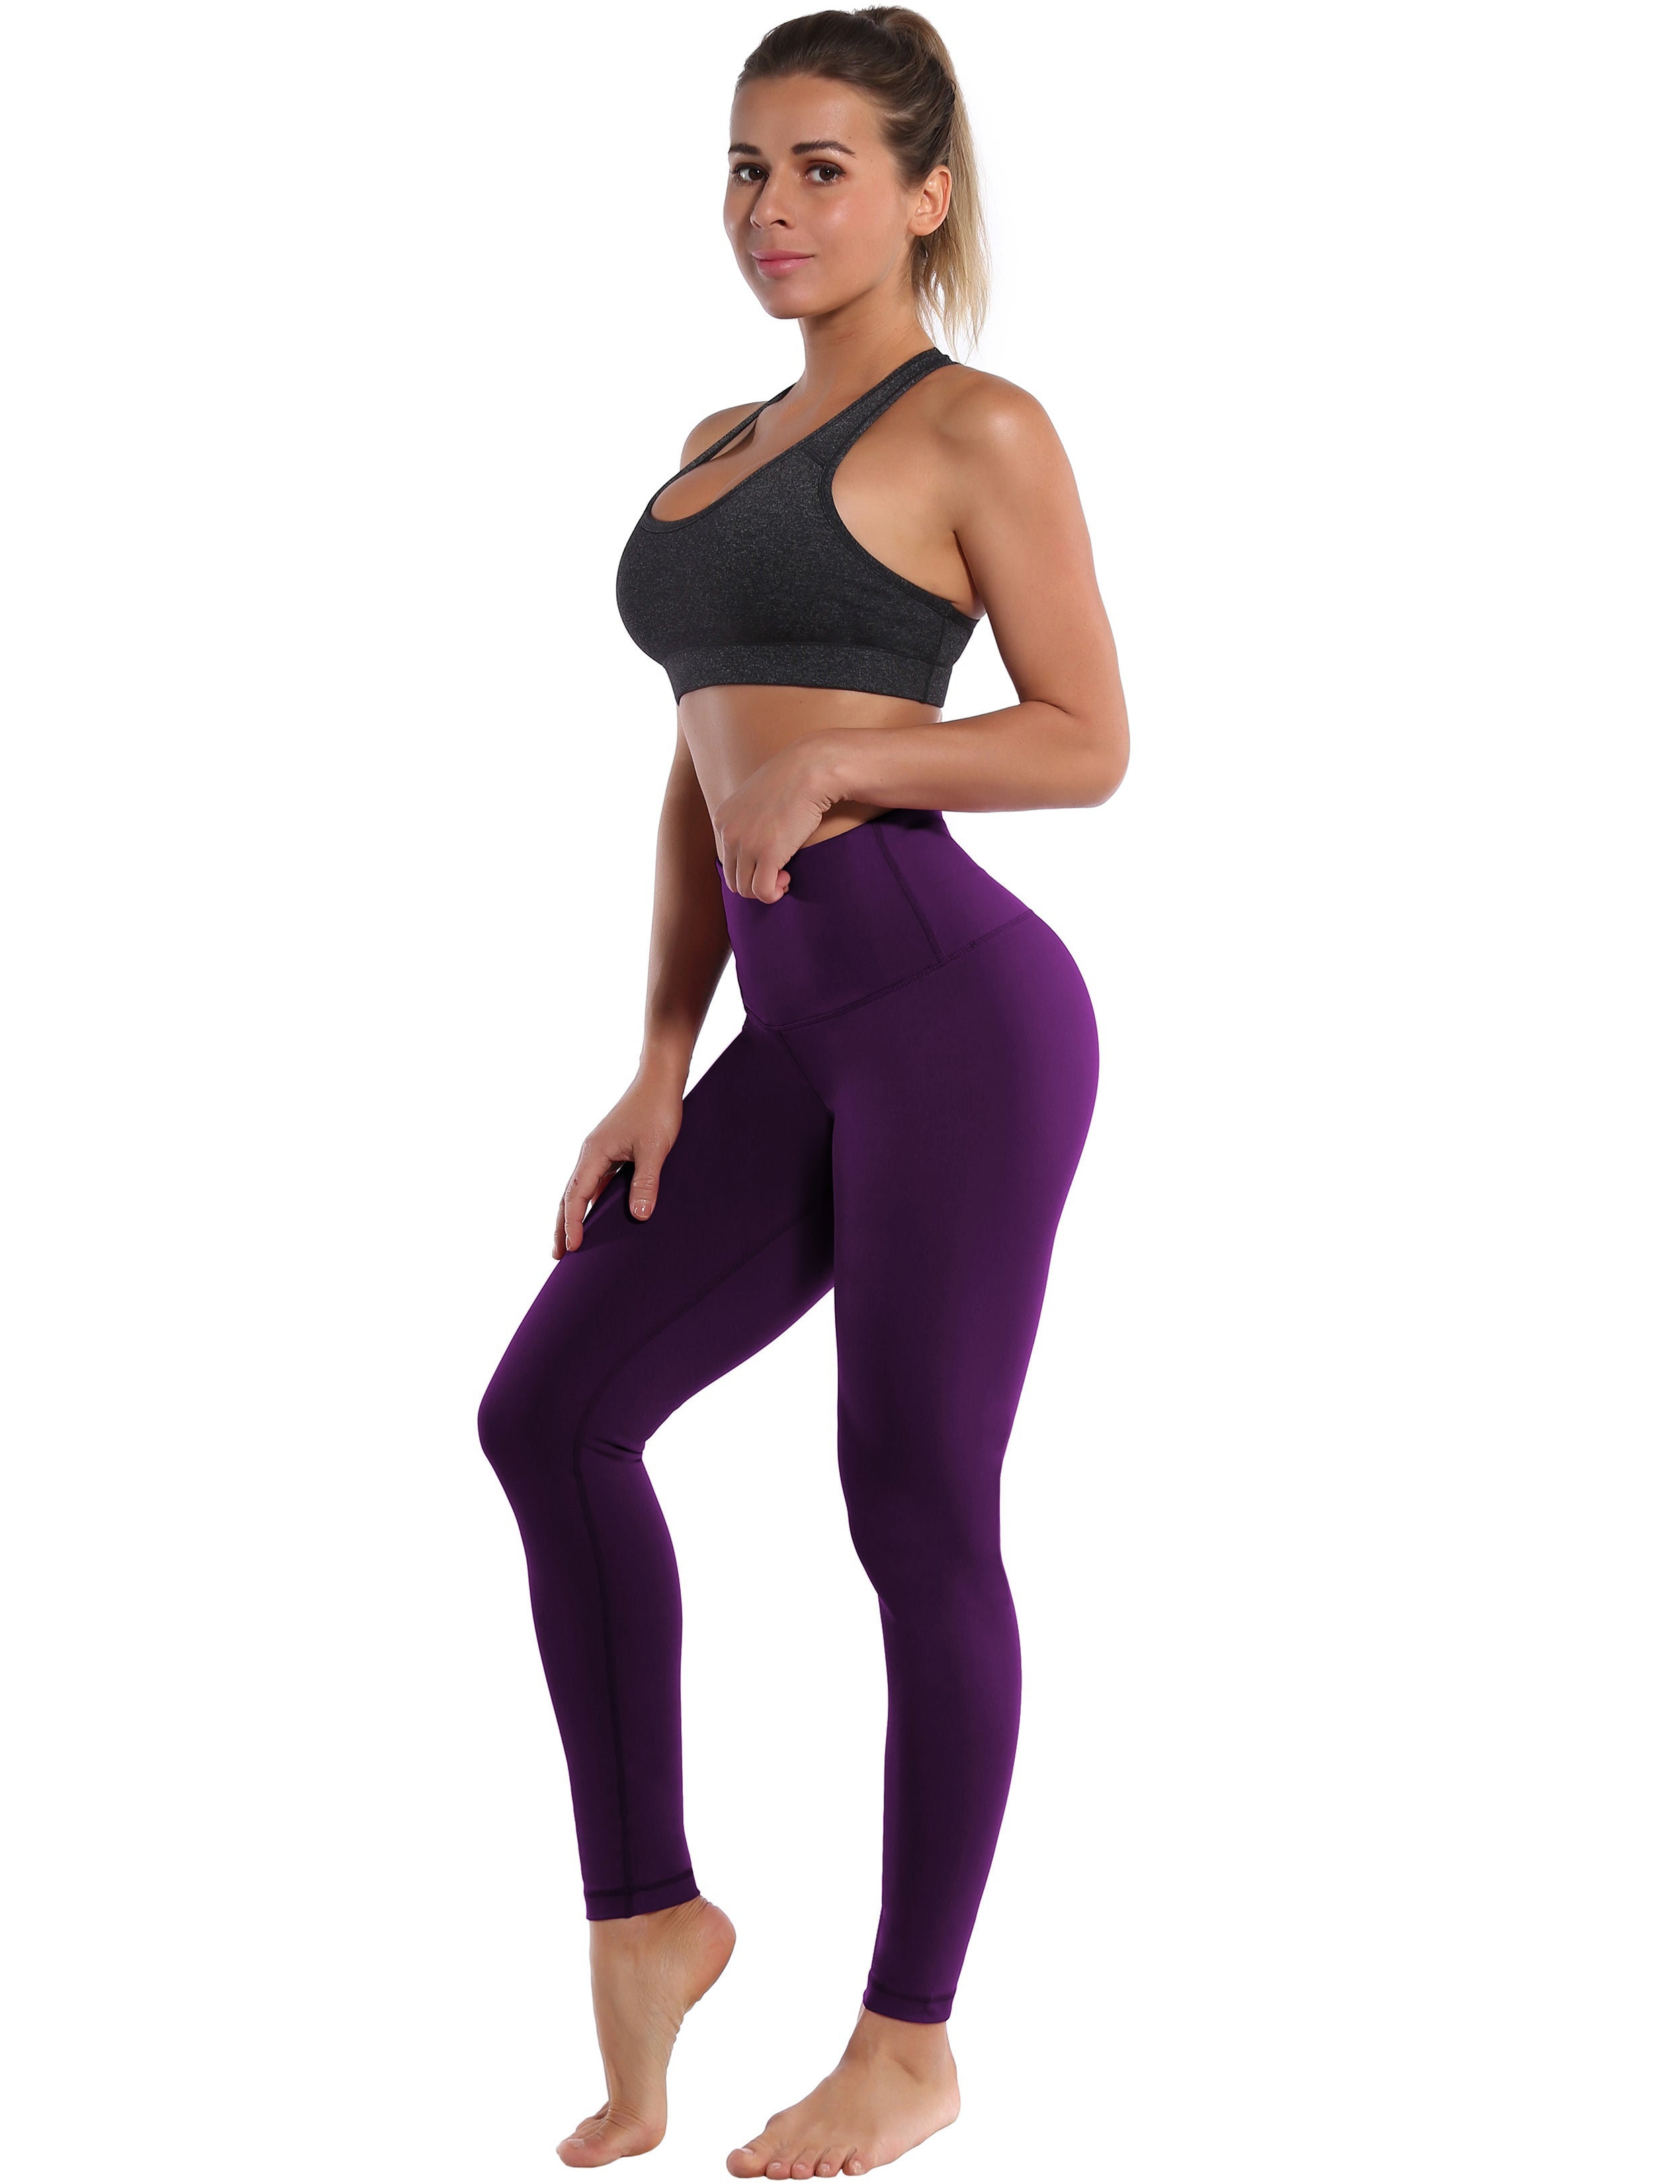 High Waist Pilates Pants plum 75%Nylon/25%Spandex Fabric doesn't attract lint easily 4-way stretch No see-through Moisture-wicking Tummy control Inner pocket Four lengths